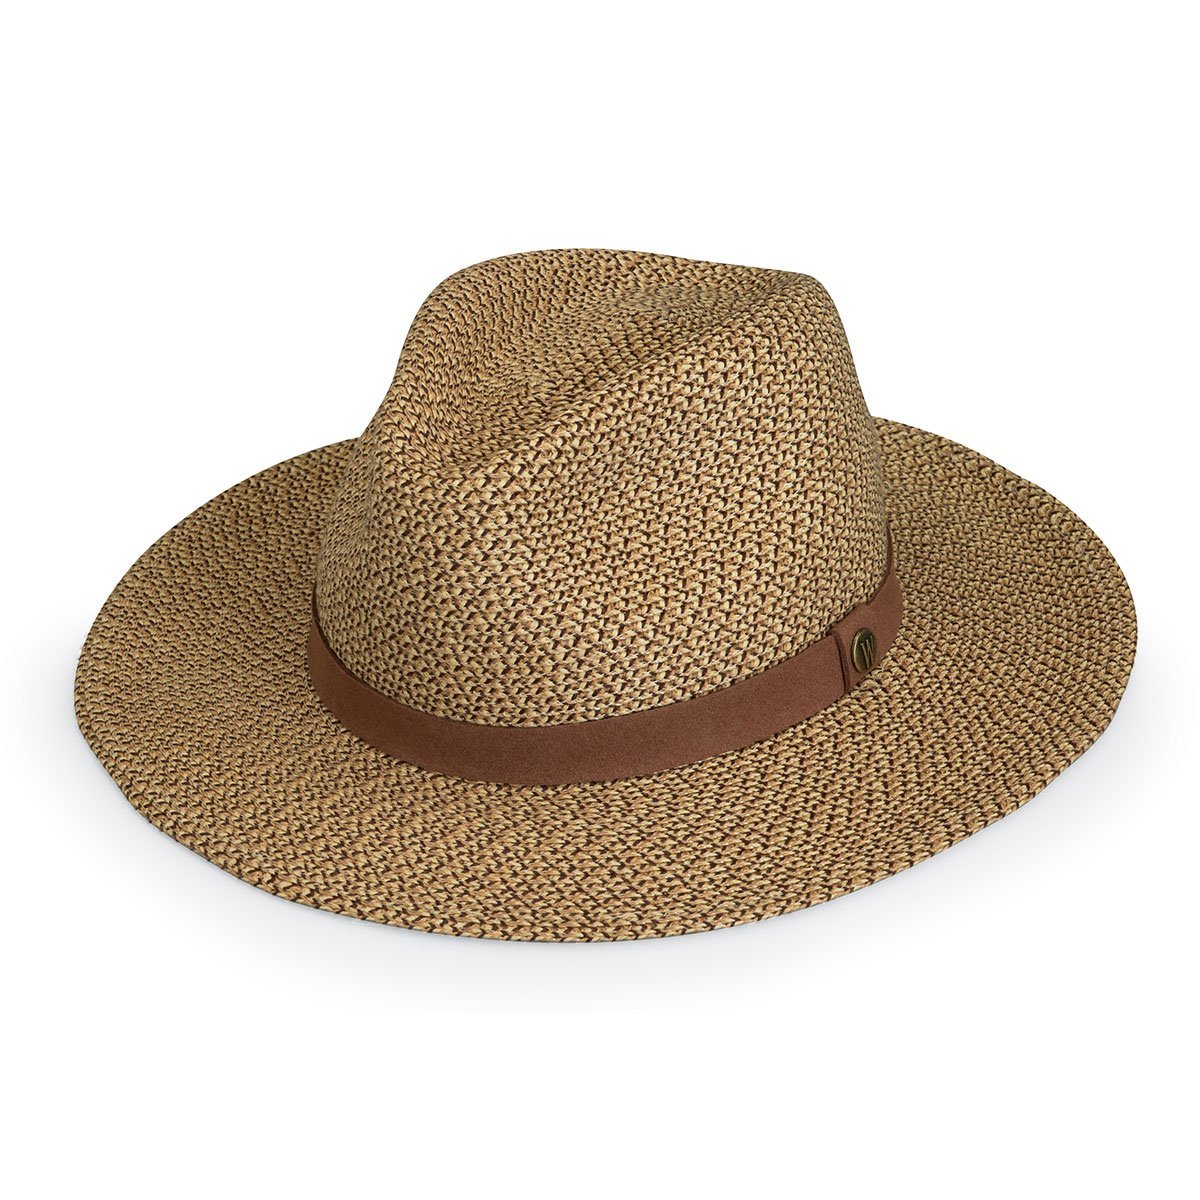 Featuring Front of Packable Fedora Style Outback UPF Summer Sun Hat from Wallaroo